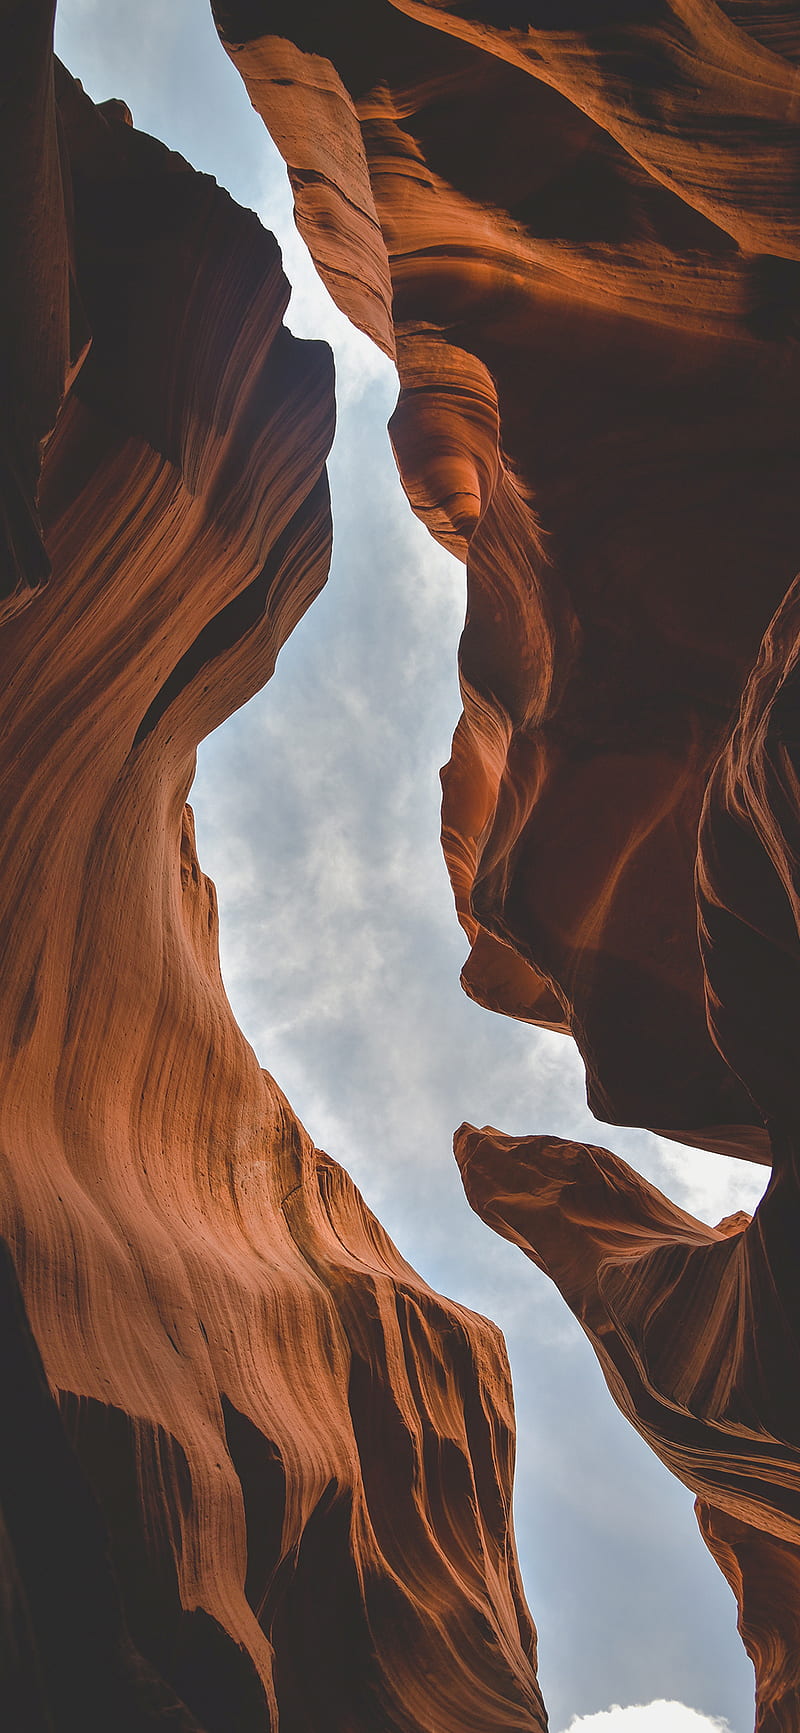 Update more than 77 antelope canyon wallpaper best - in.coedo.com.vn